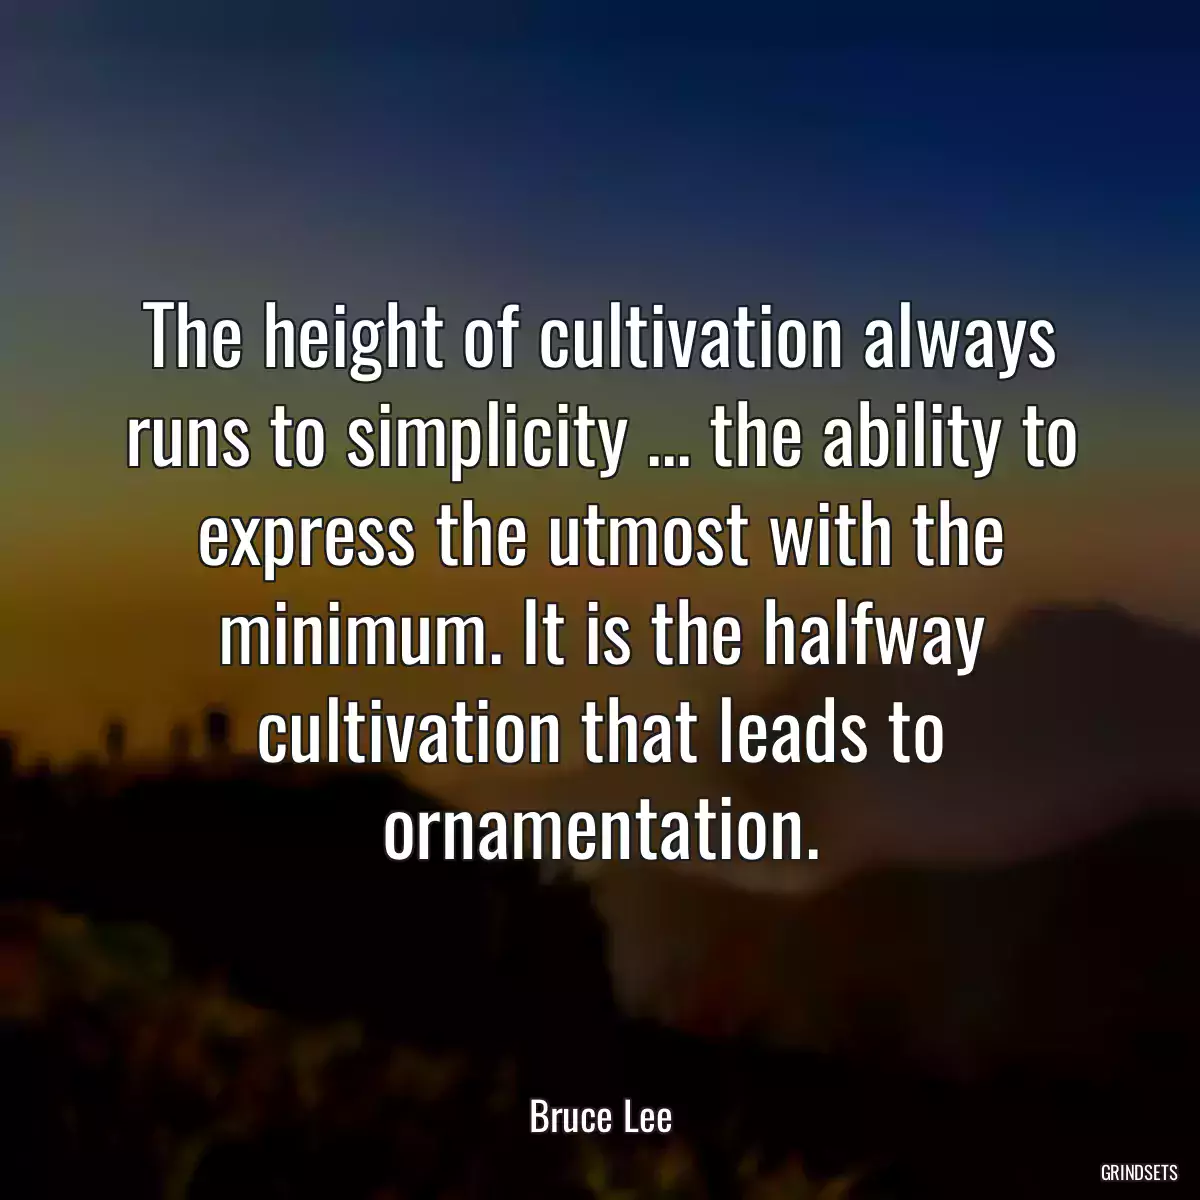 The height of cultivation always runs to simplicity ... the ability to express the utmost with the minimum. It is the halfway cultivation that leads to ornamentation.